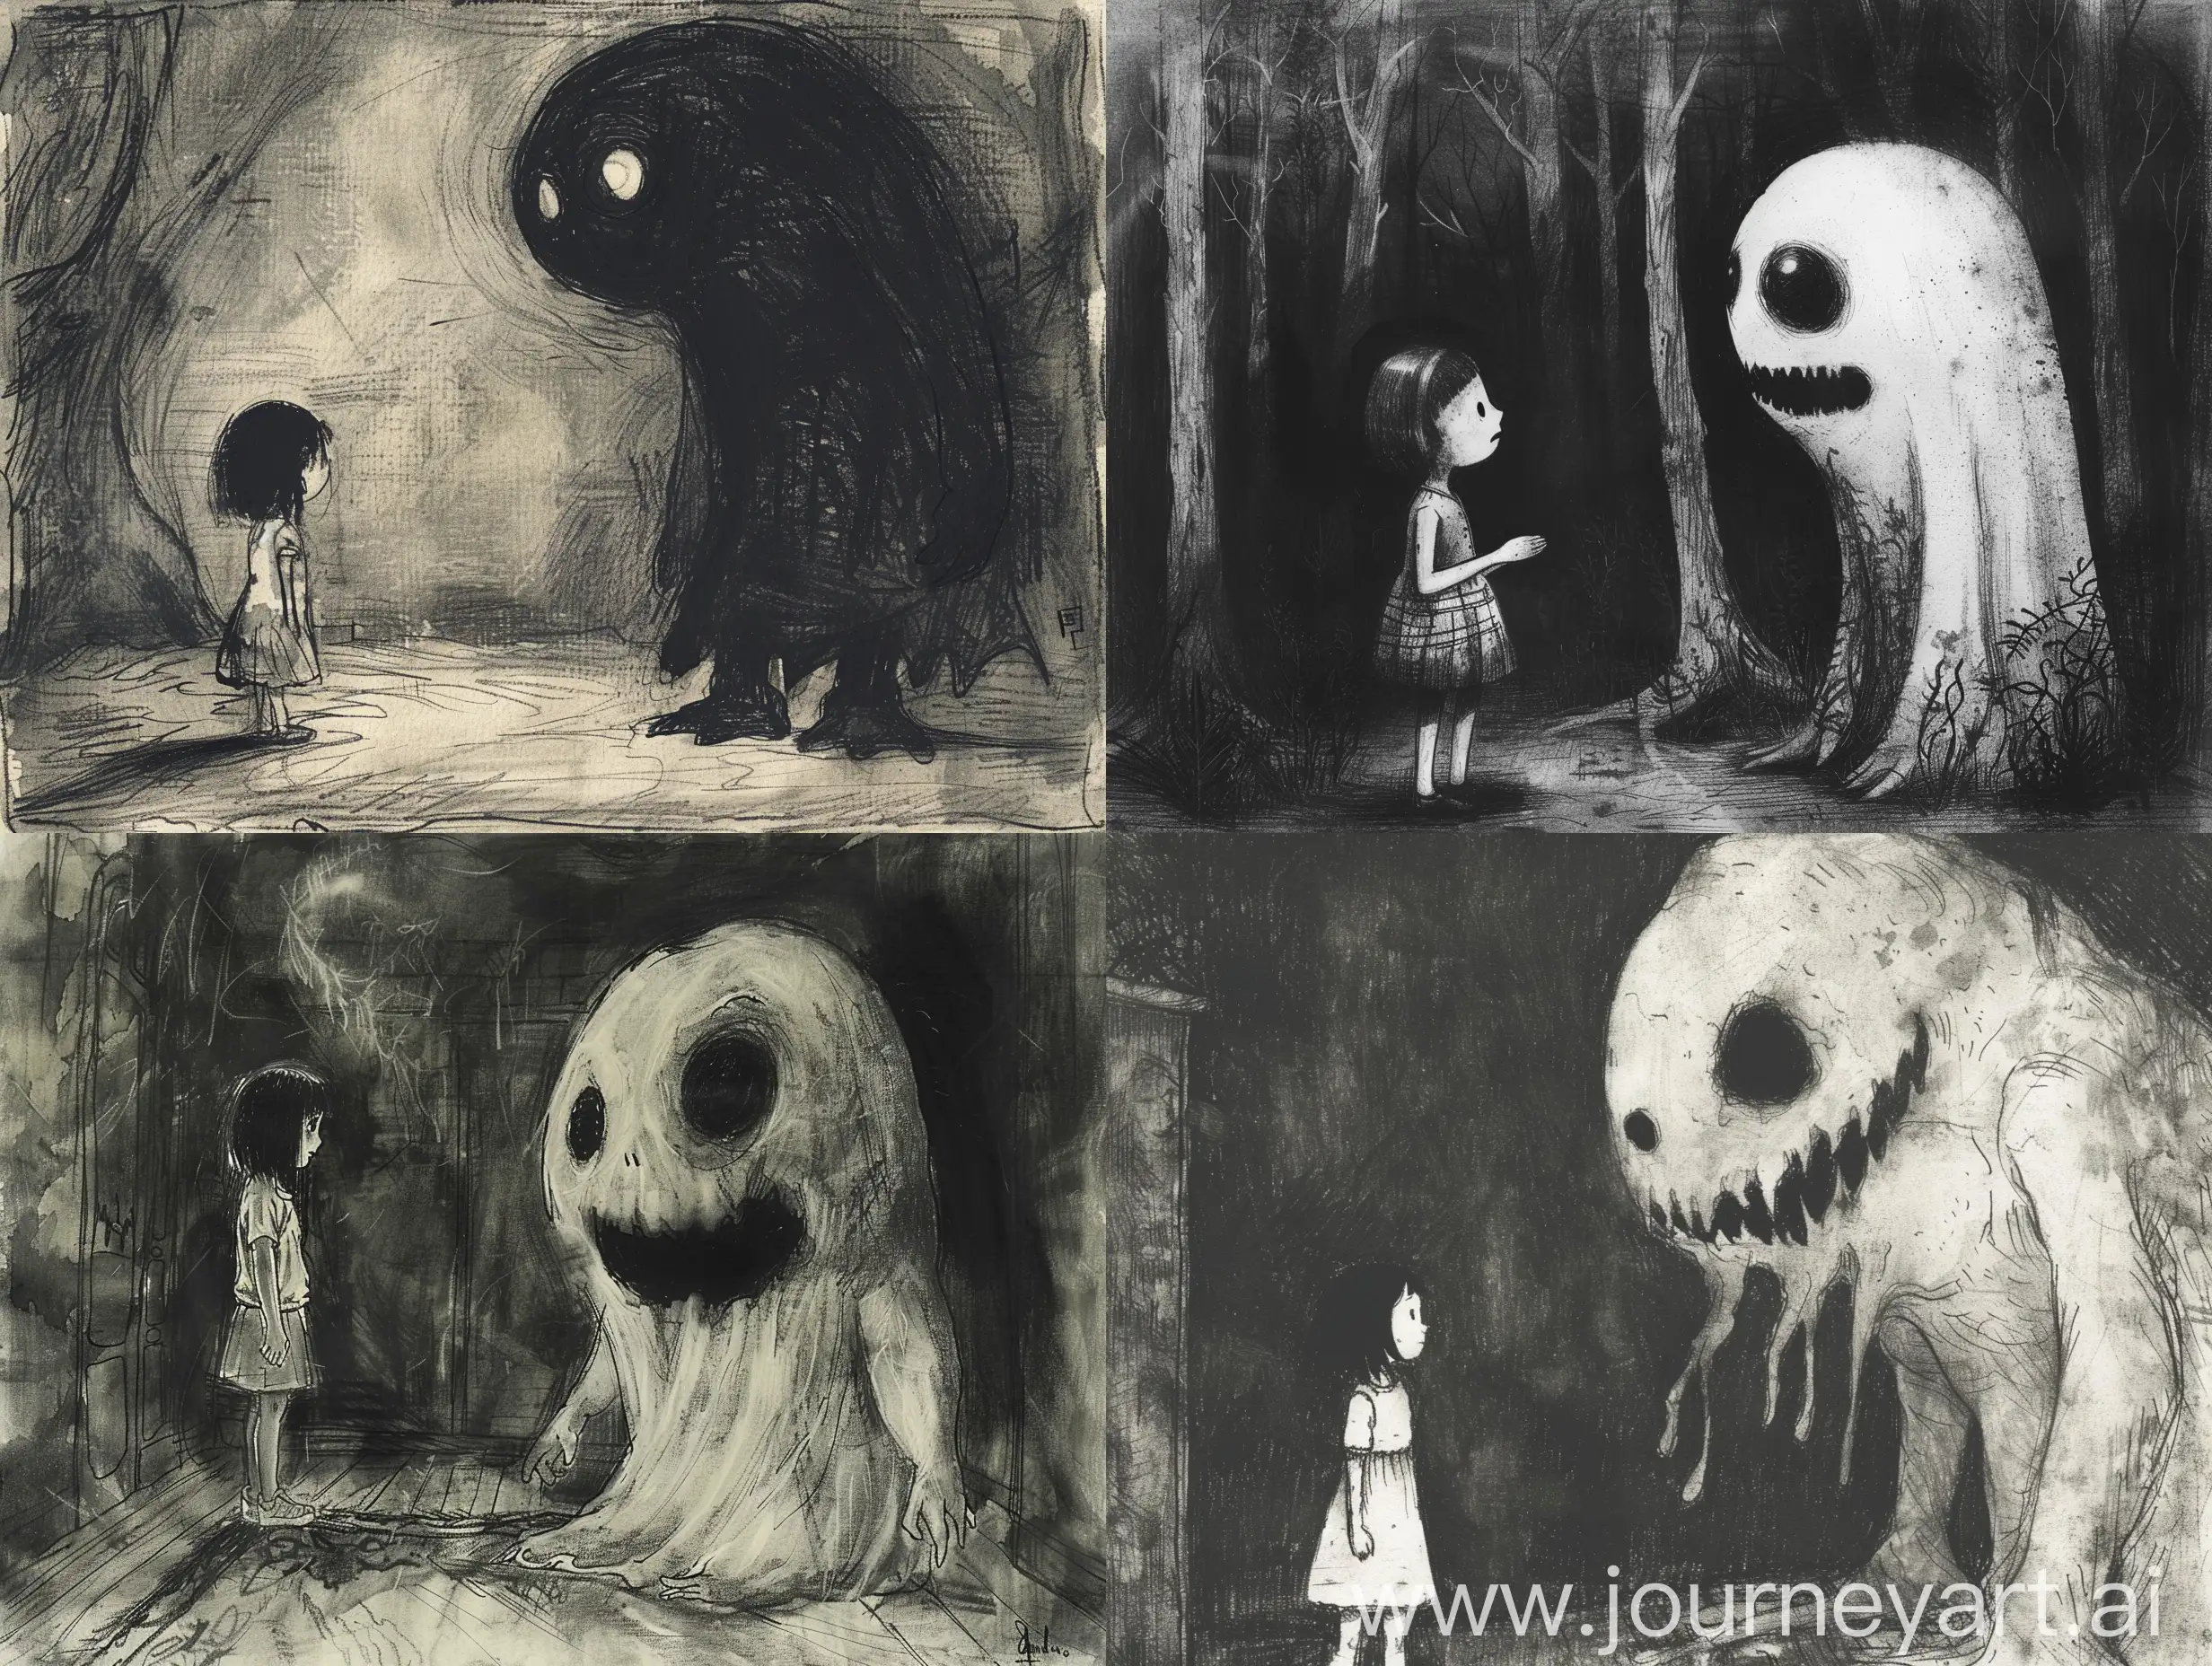 Eerie-Charcoal-Drawing-Encounter-of-a-Brave-Child-with-a-Sinister-Ghost